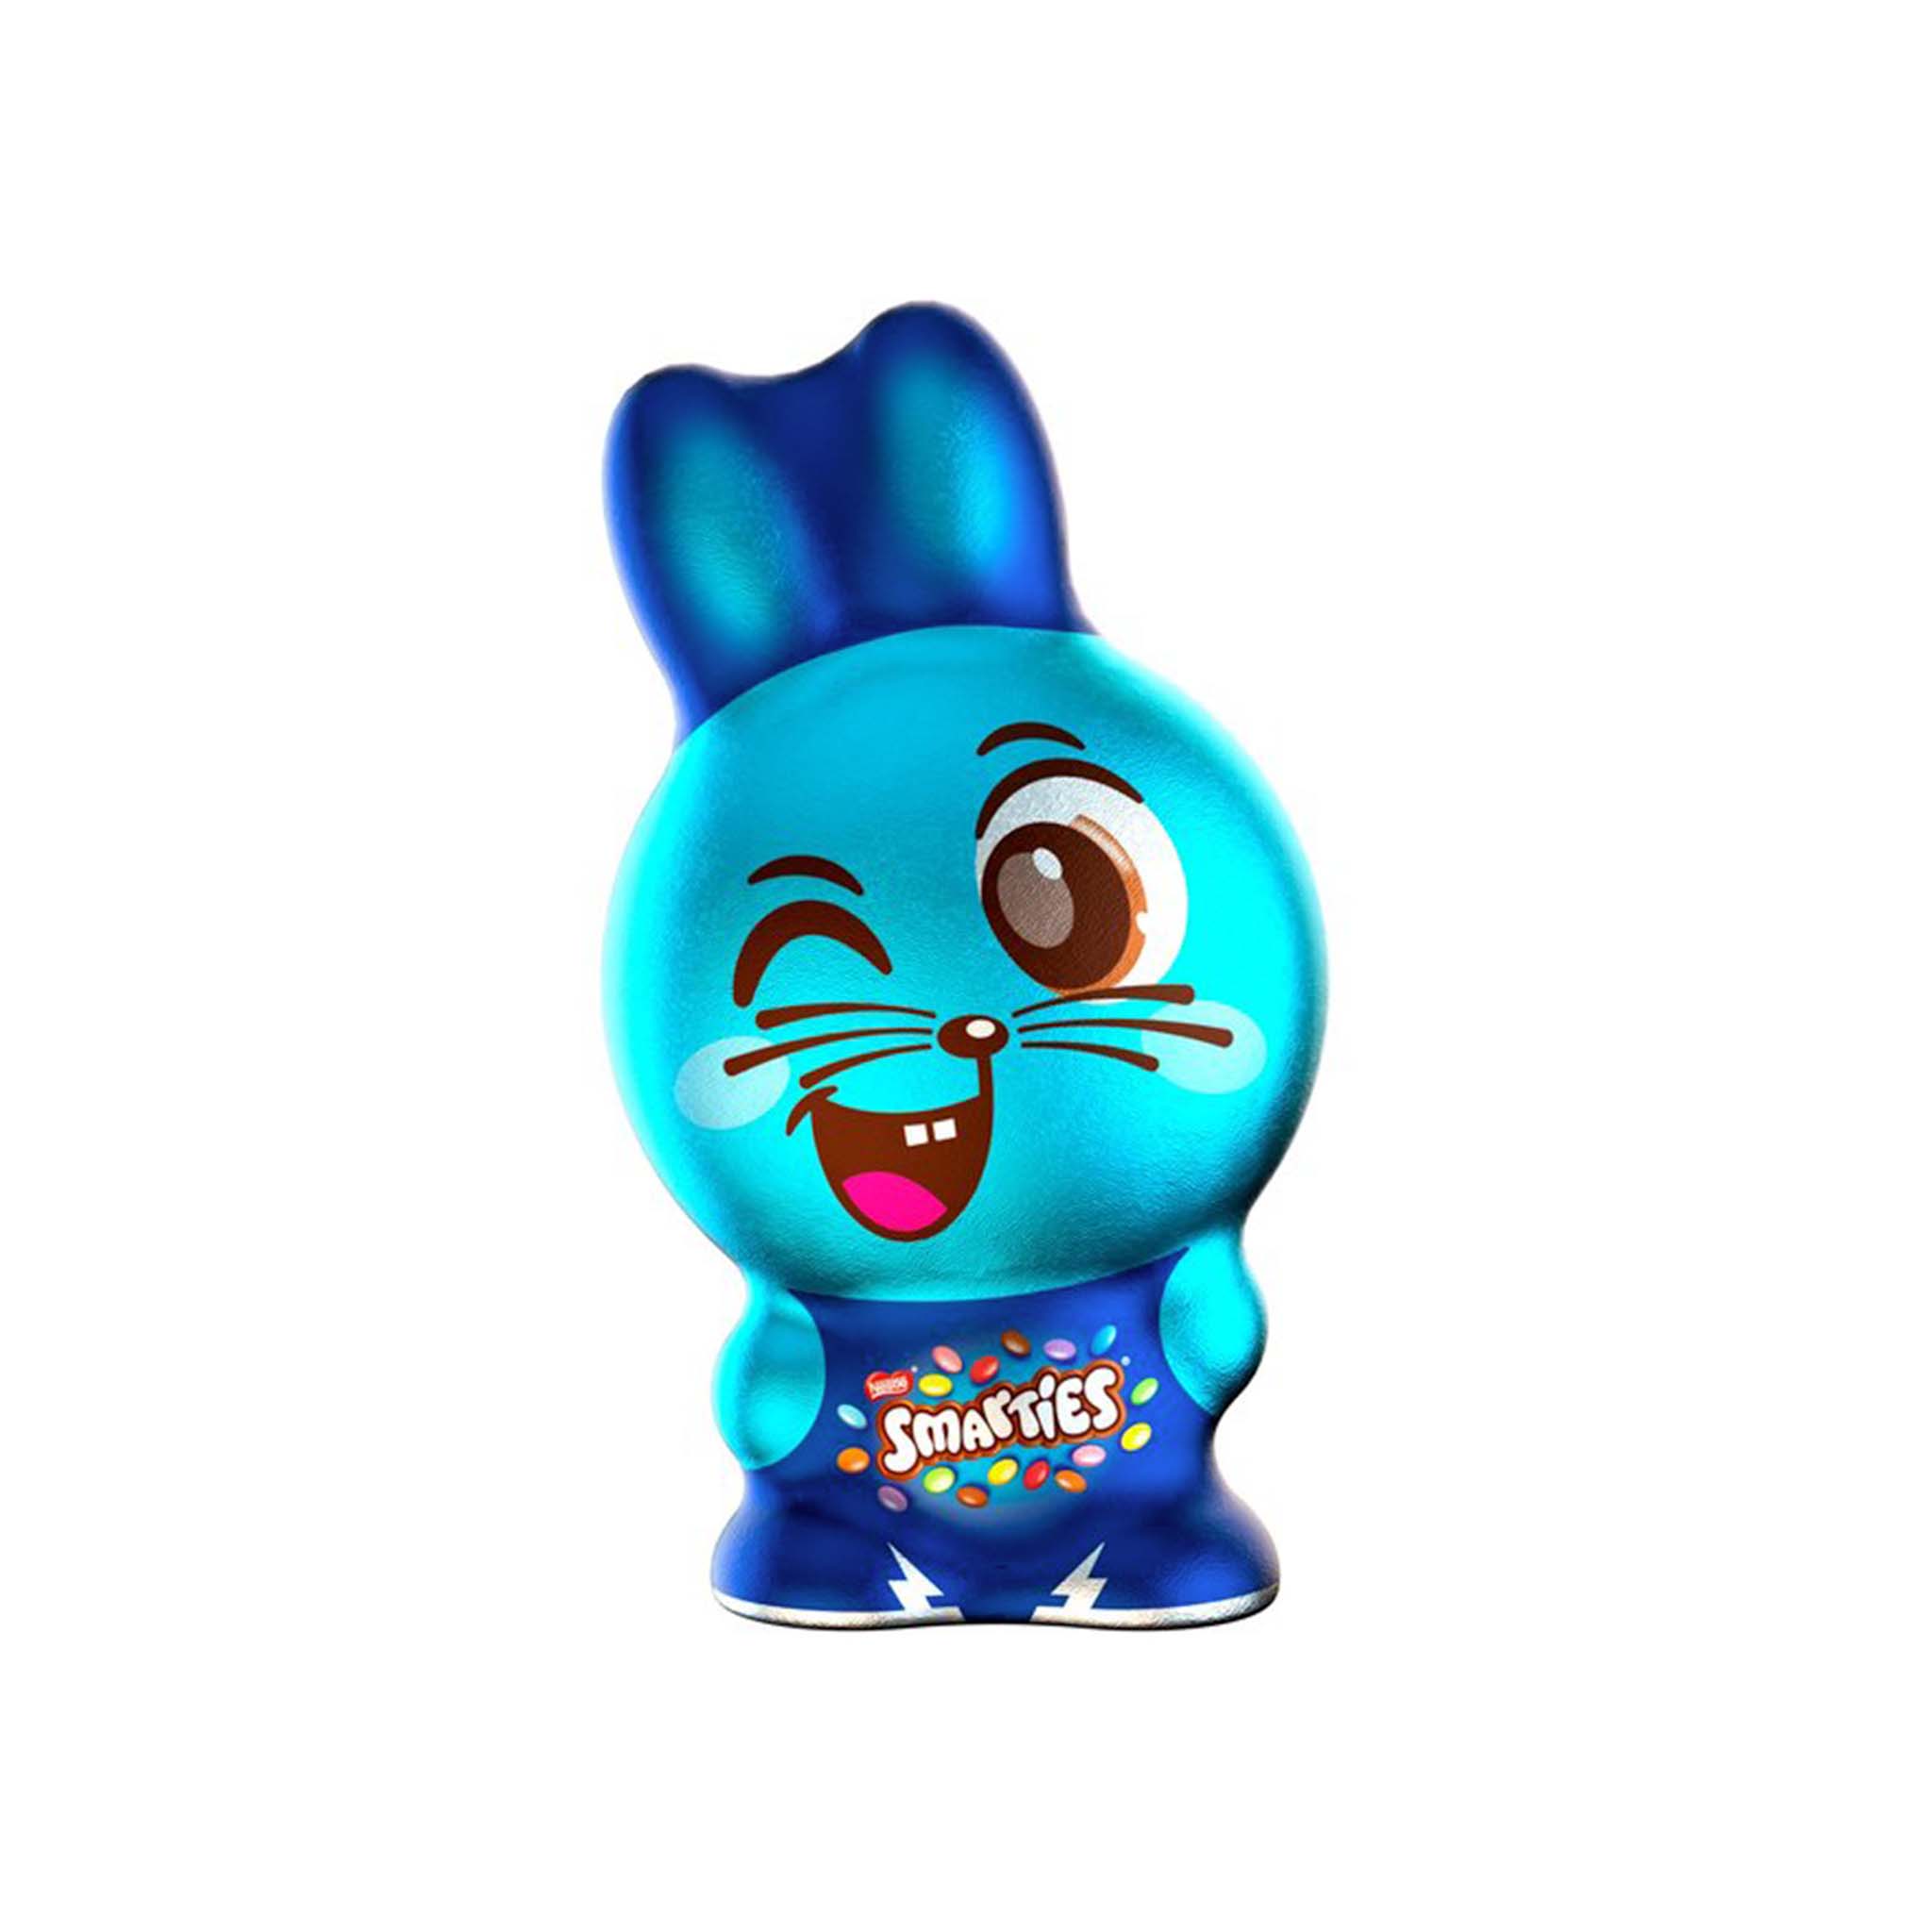 SMARTIES FILLED CHOCOLATE BUNNY 94g